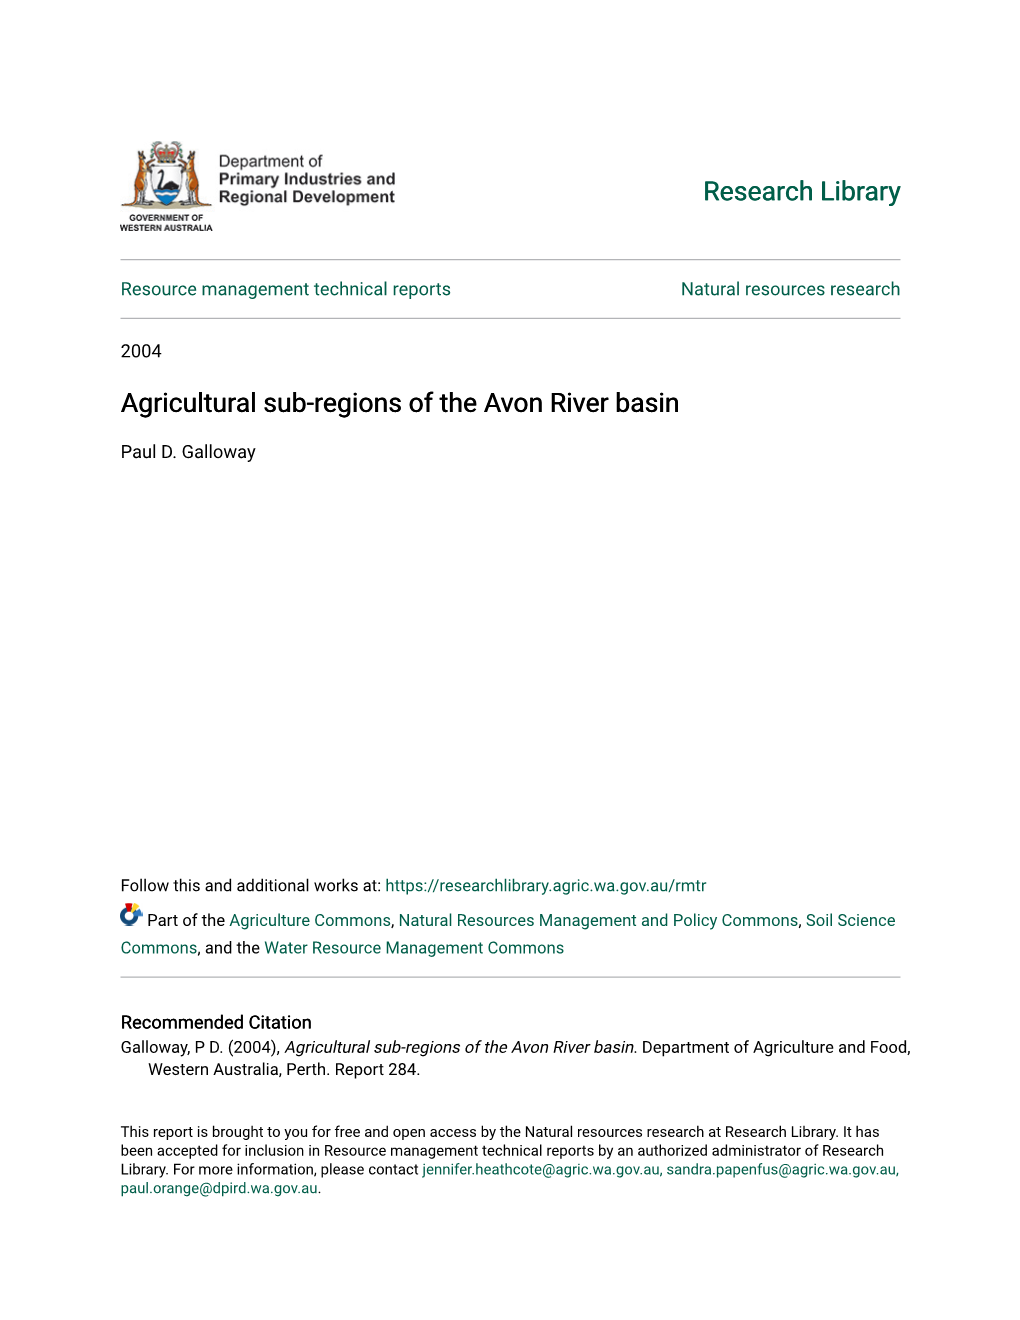 Agricultural Sub-Regions of the Avon River Basin